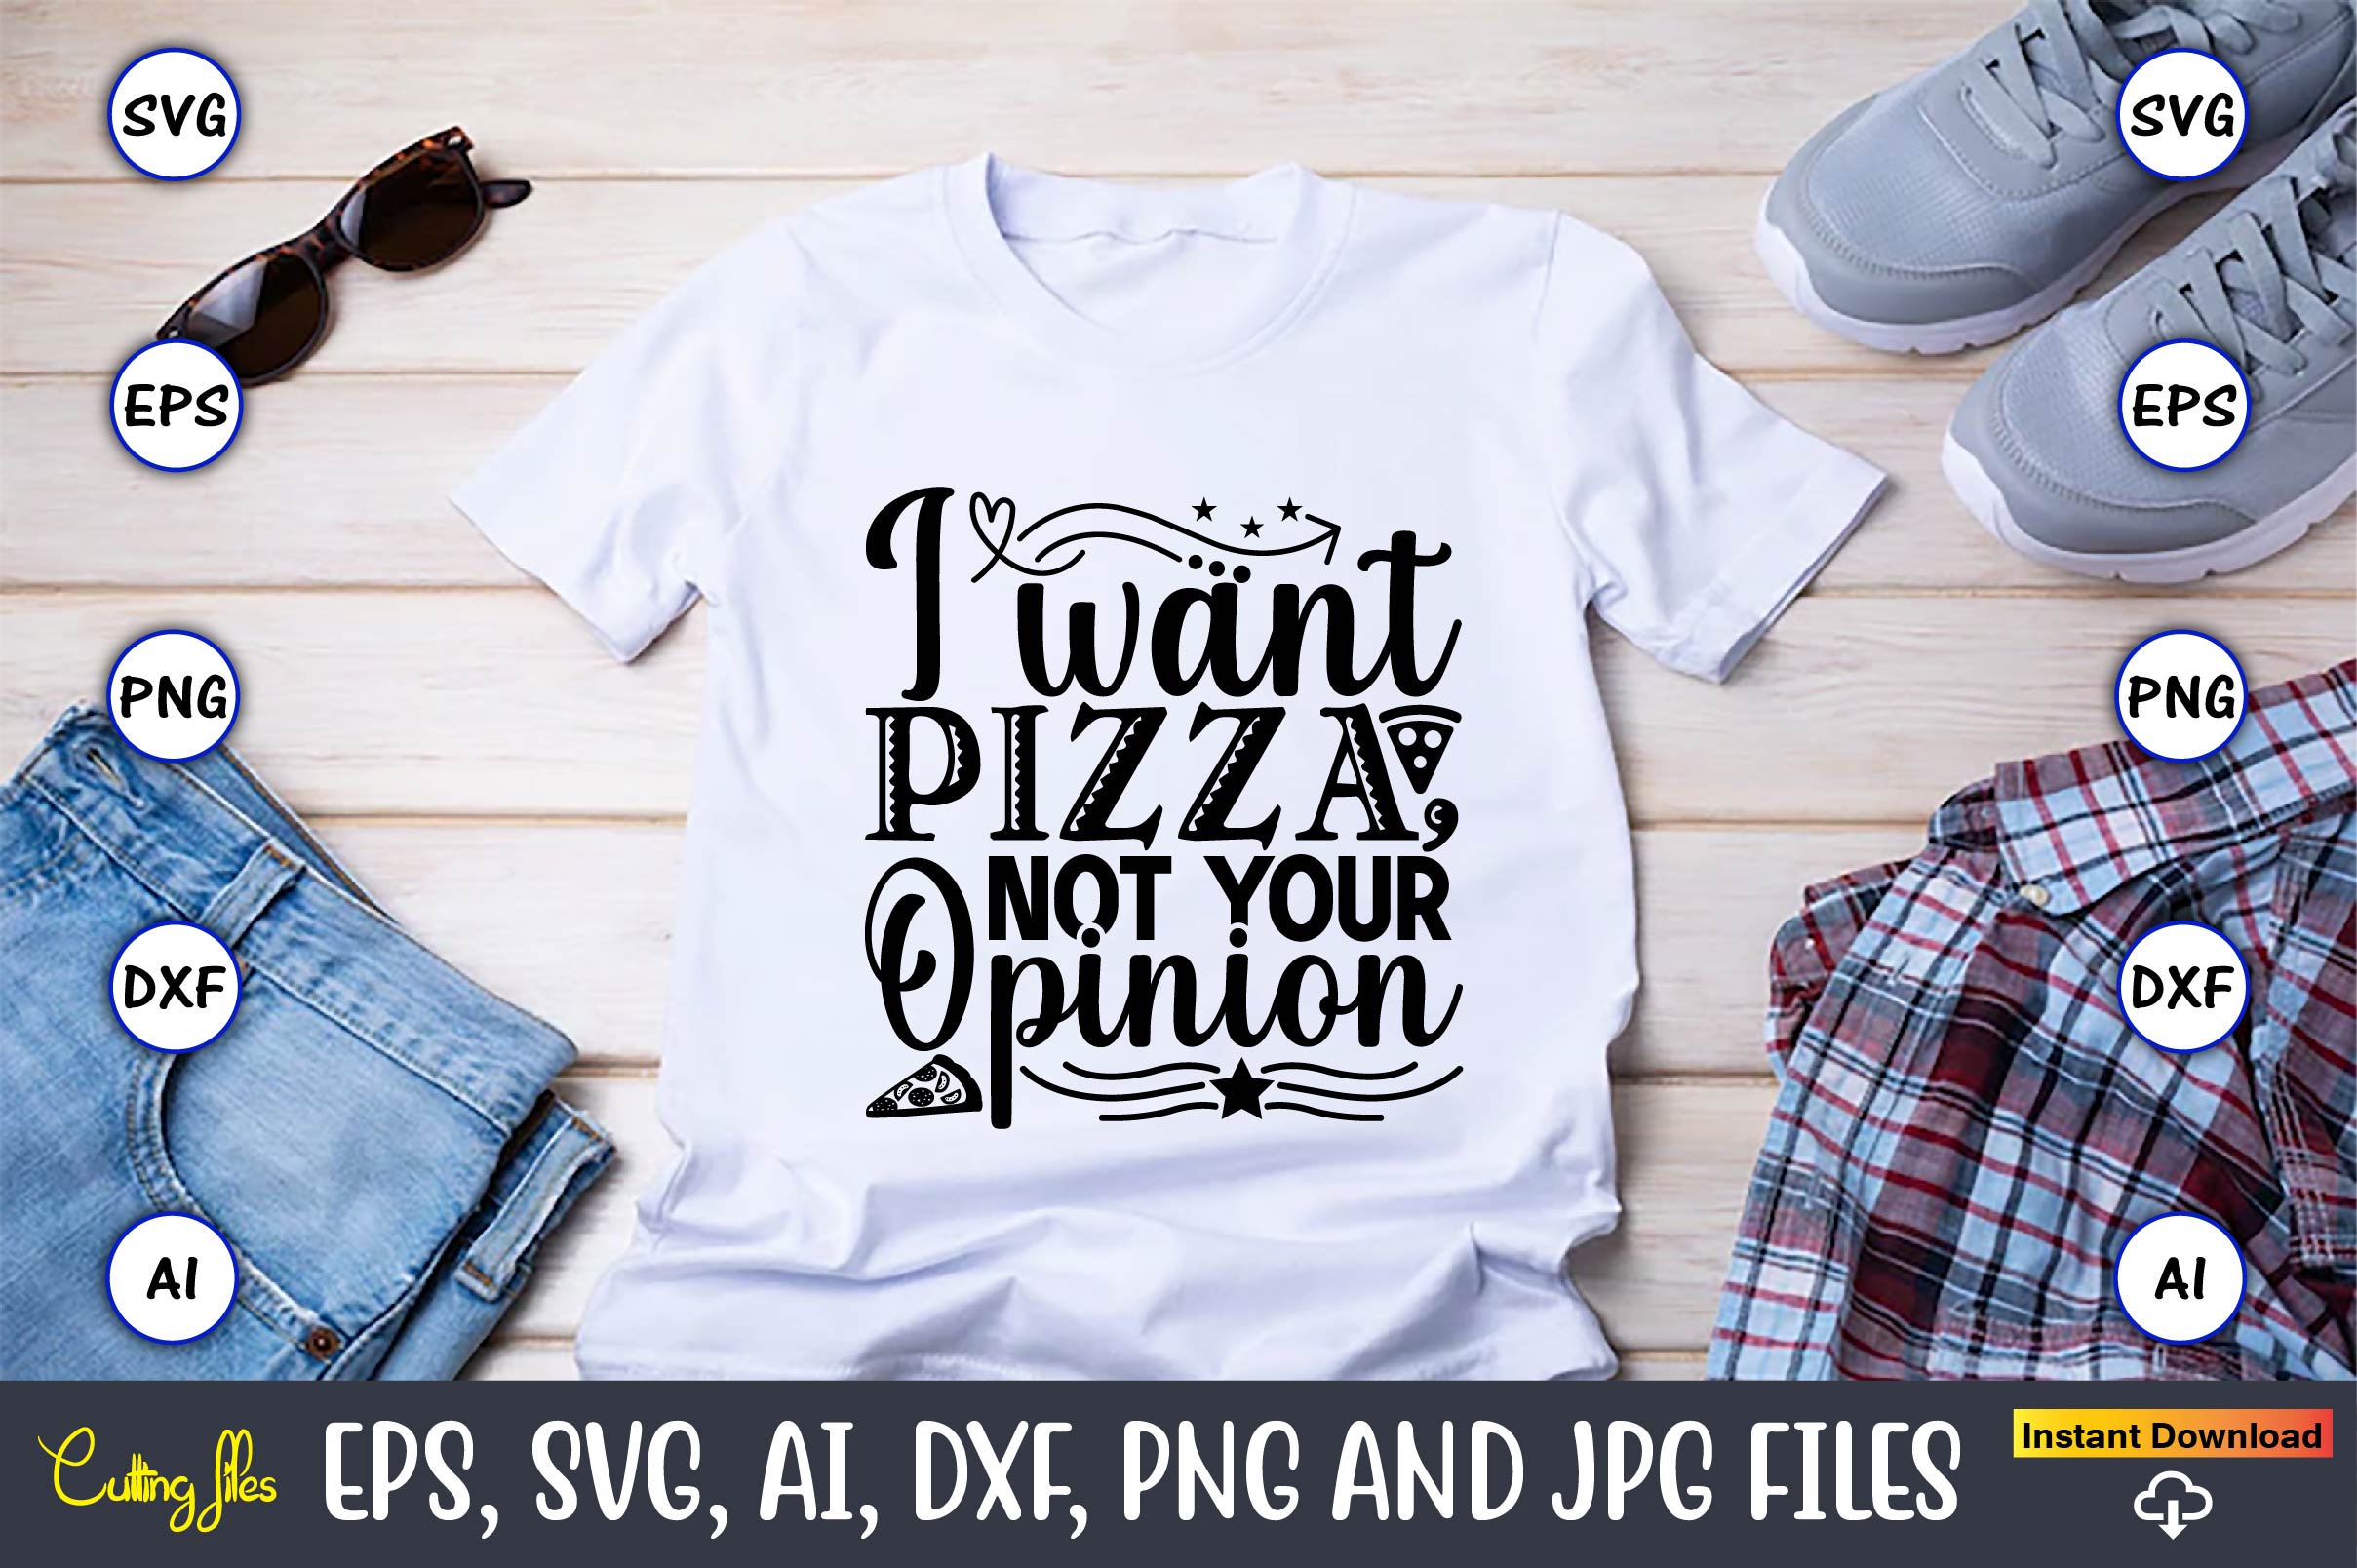 Picture of a white T-shirt with irresistible slogan I want pizza, not your opinion.